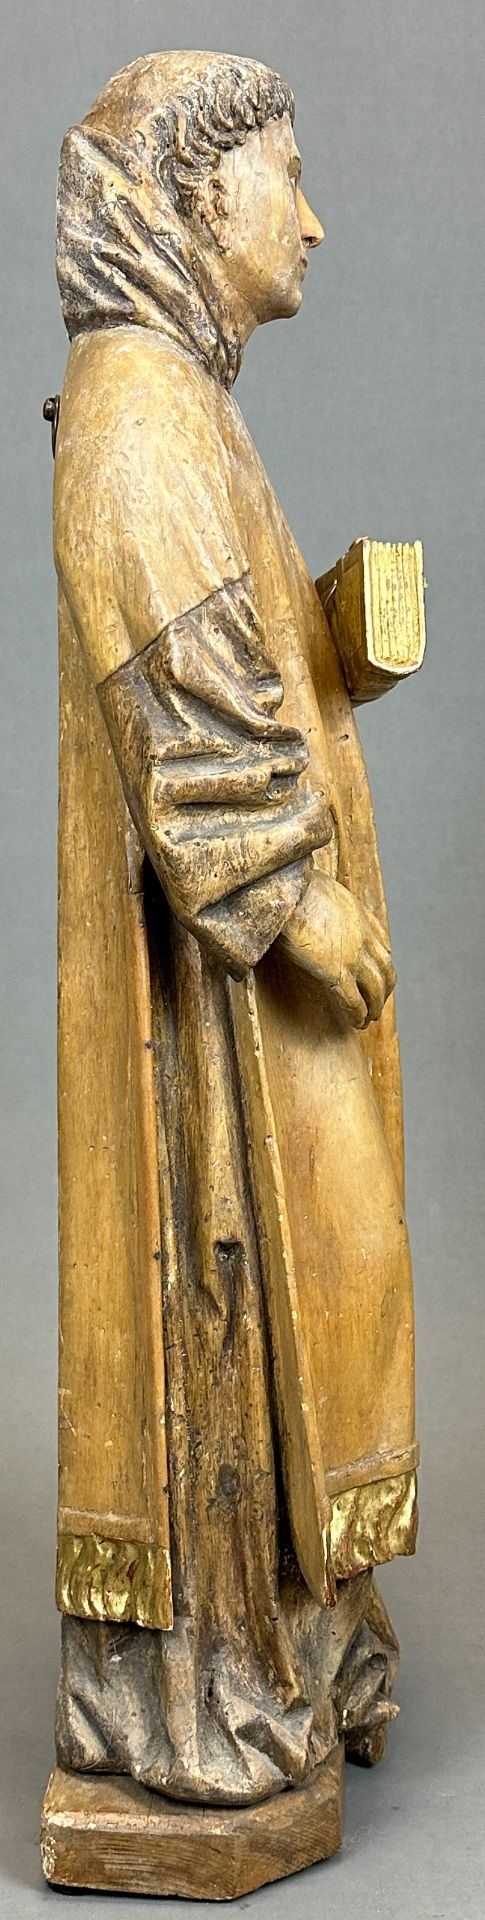 Wooden figure. Monk with book. Last third of the 17th century. South Germany. - Image 4 of 9